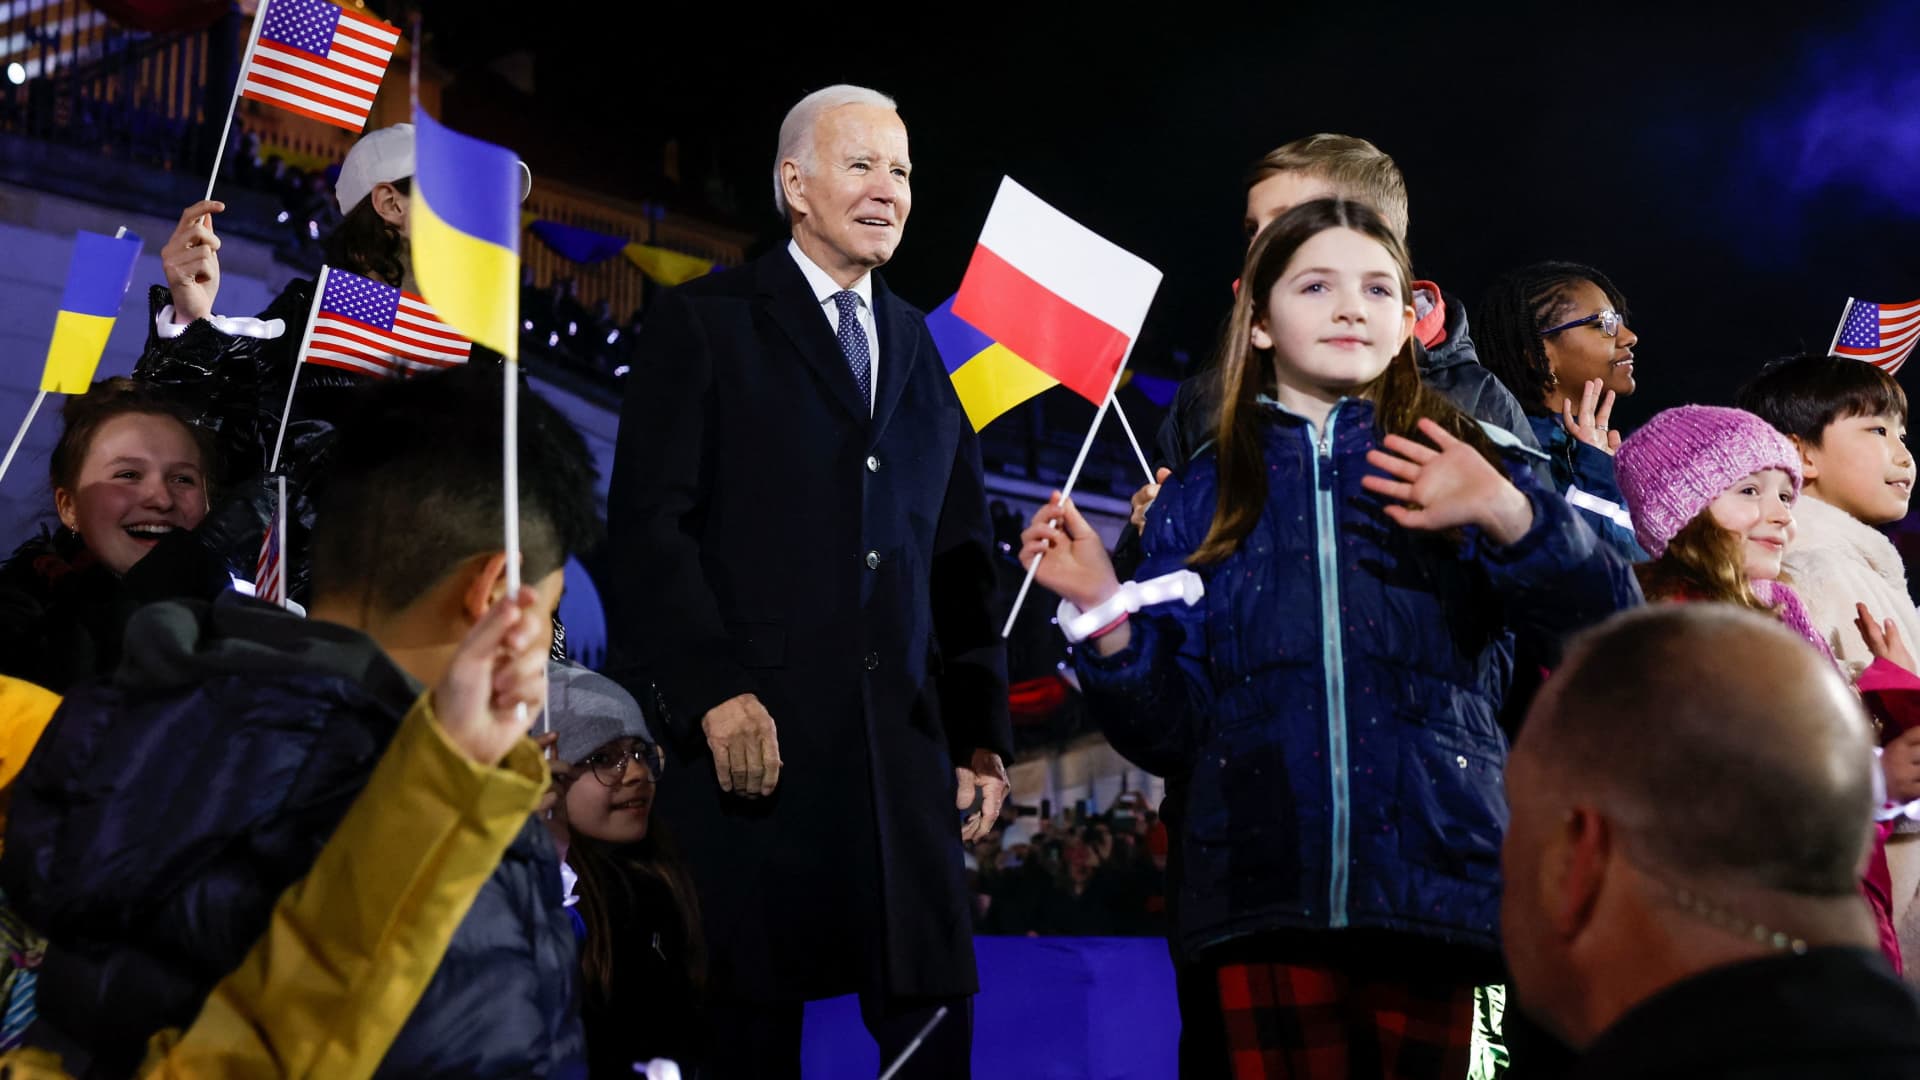 U.S. President Joe Biden stands onstage with children waving flags after he delivered remarks ahead of the one year anniversary of Russia's invasion of Ukraine, outside the Royal Castle, in Warsaw, Poland, February 21, 2023.